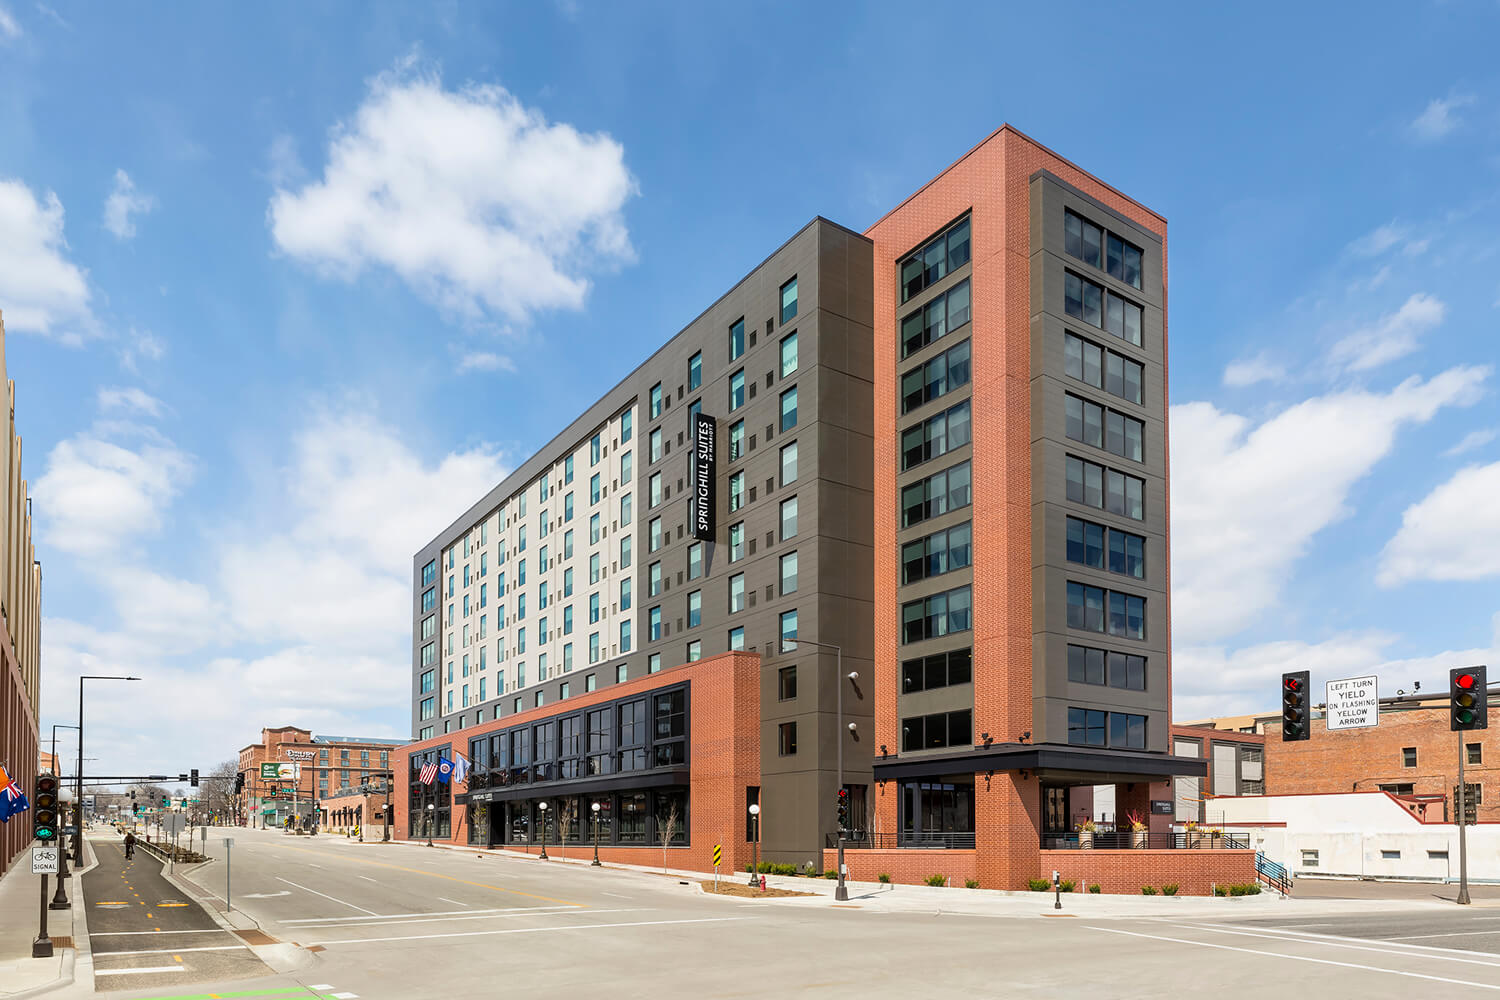 SpringHill Suites By Marriott St. Paul Downtown